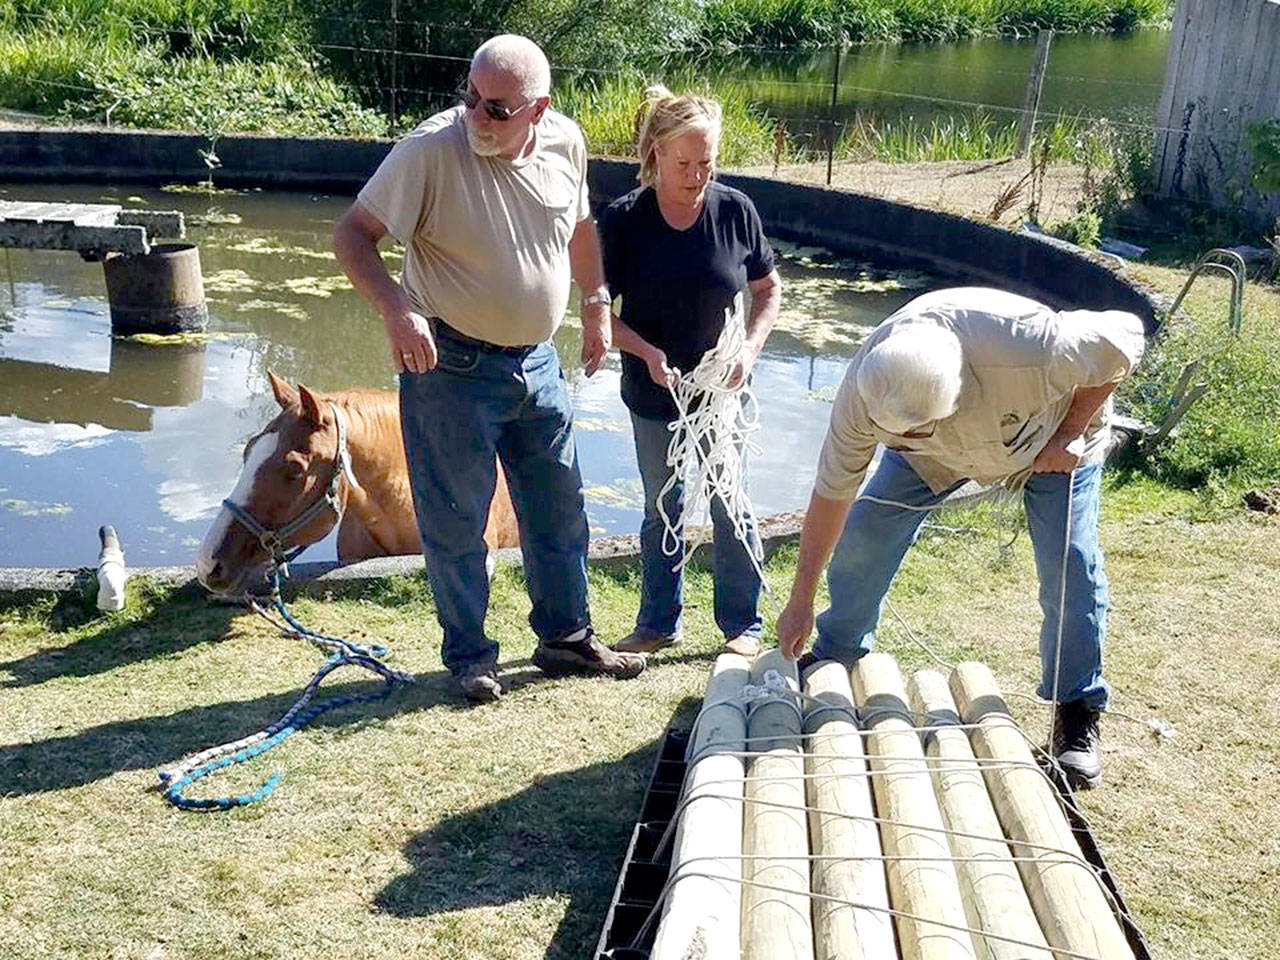 John Poe, left, Diane Royall and Mike Villancourt work on part of a 10-foot ramp to help walk an older horse with one blind eye out of a man-made fish pond after he fell in. (Valerie Jackson)